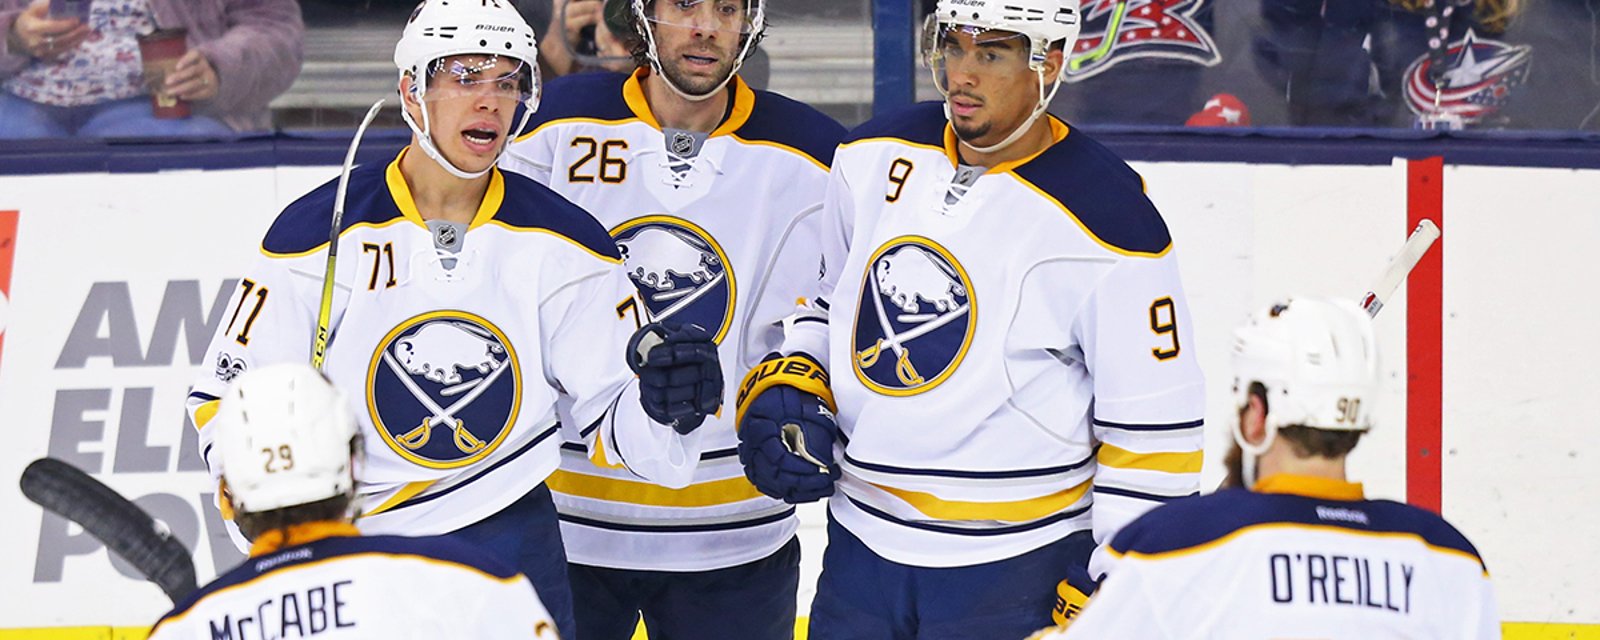 Rumor: Sabres shopping 3 players in trade talks